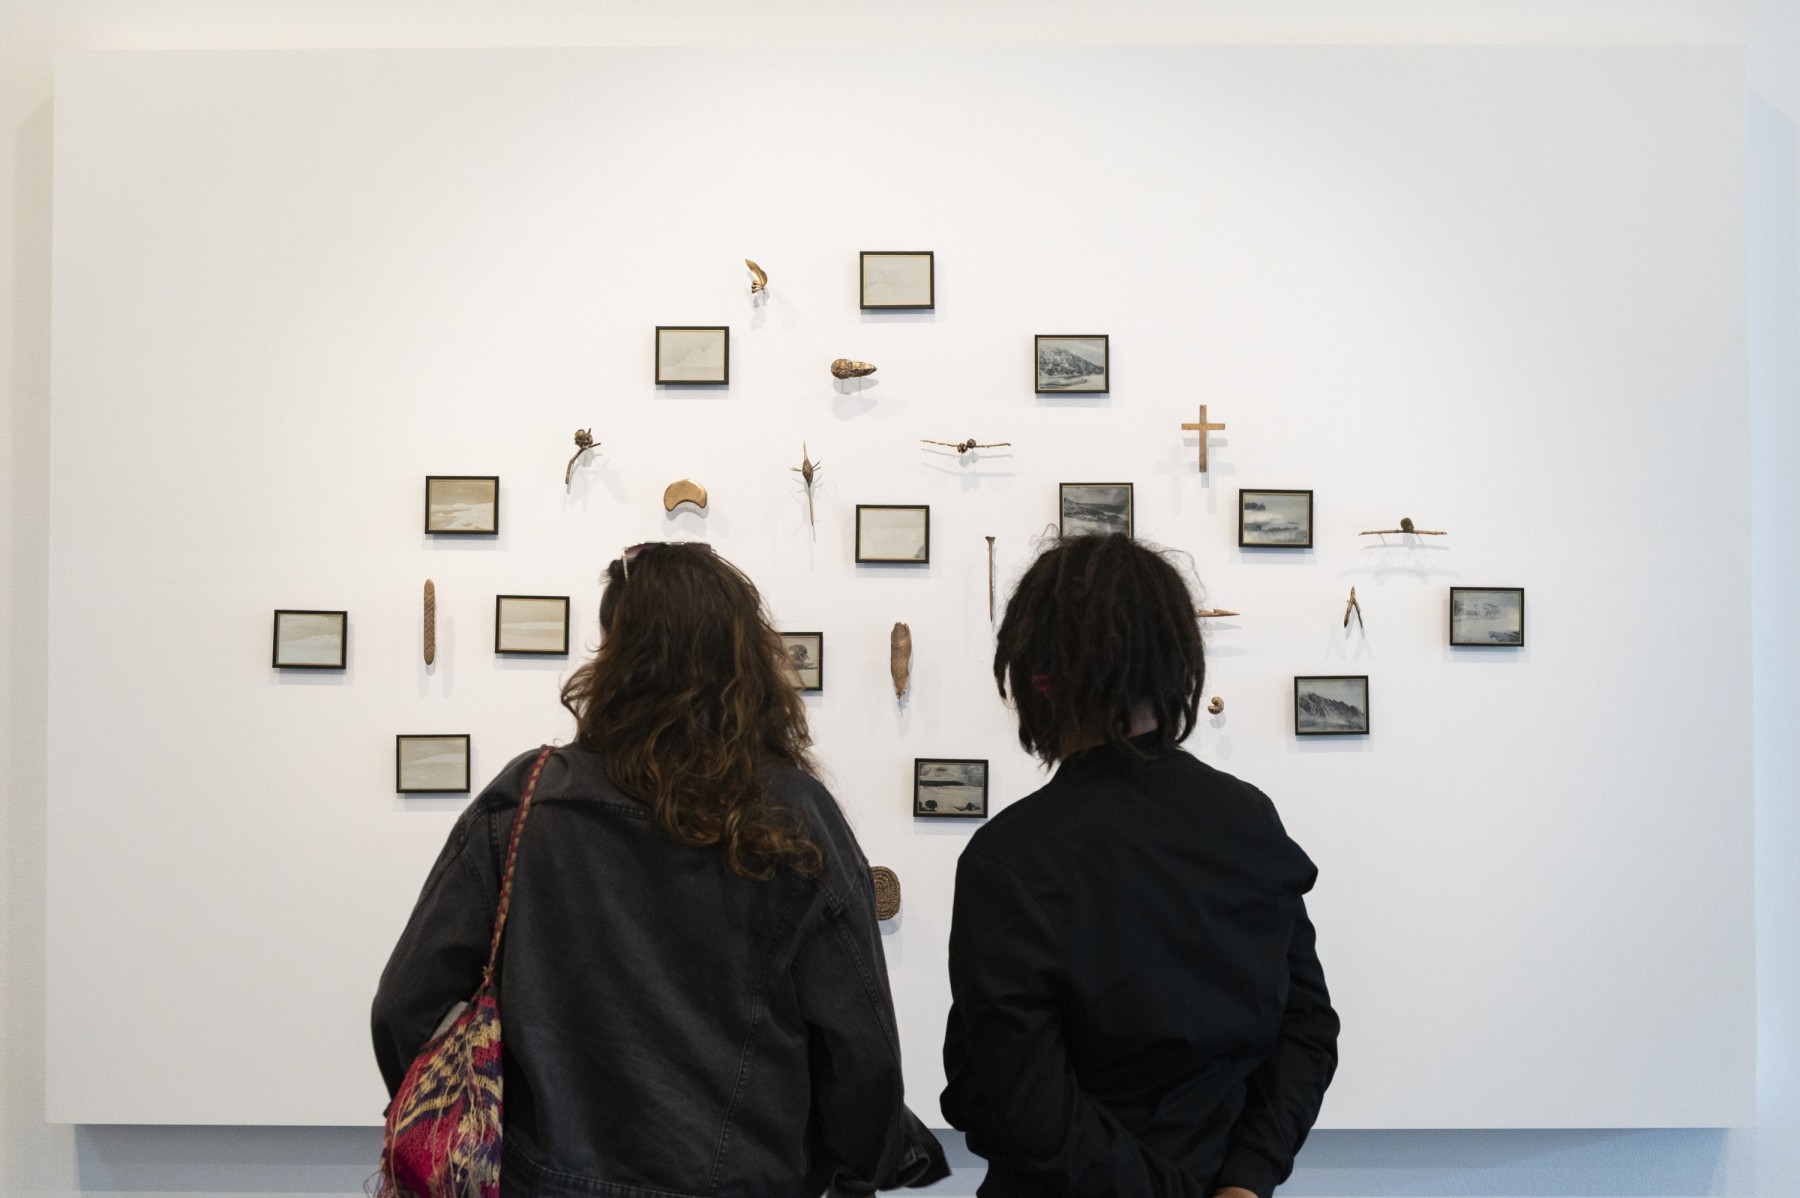 Two figures stand in front of a grid of objects attached to a while wall, they include framed photographs, a Christian cross and Indigenous tools